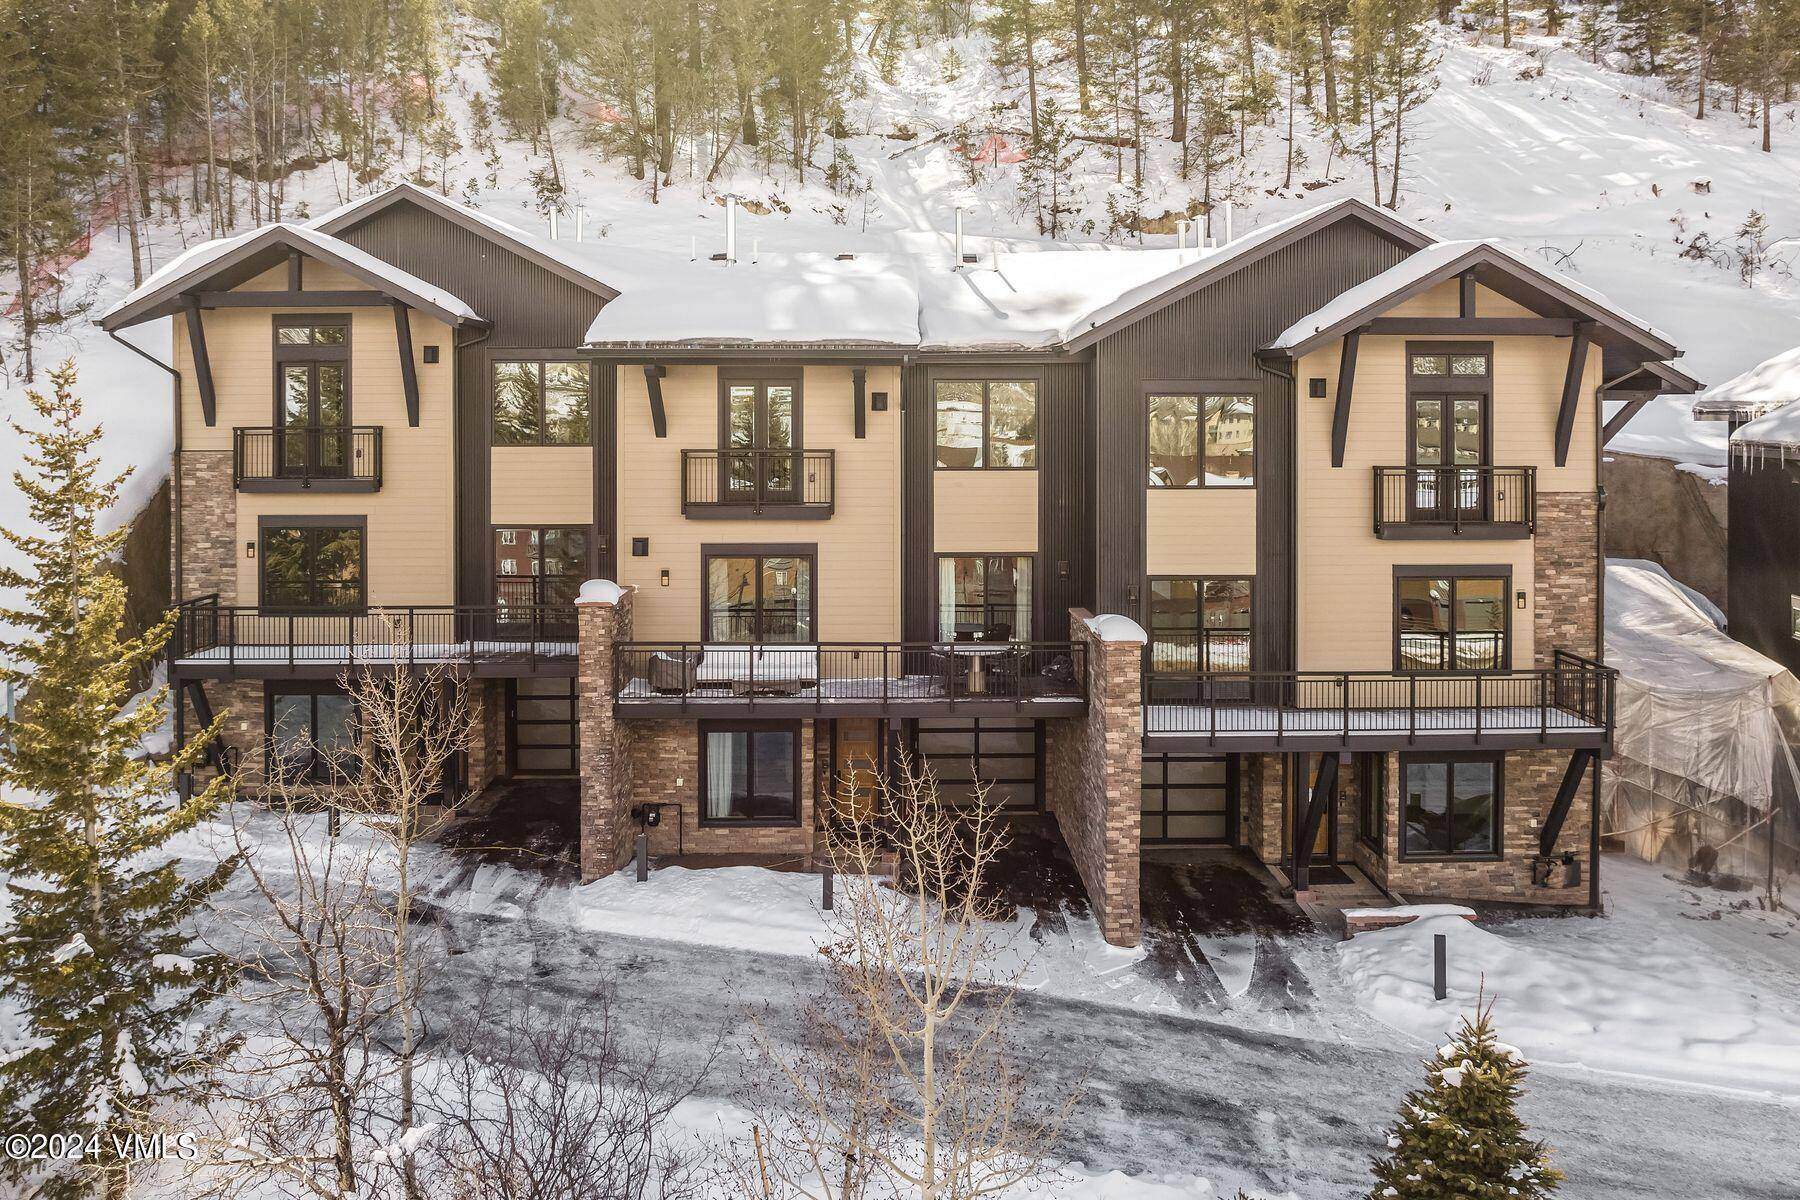 The new Echelon Townhomes are situated in a private enclave within the Vail Valley's newest community, Frontgate Avon.